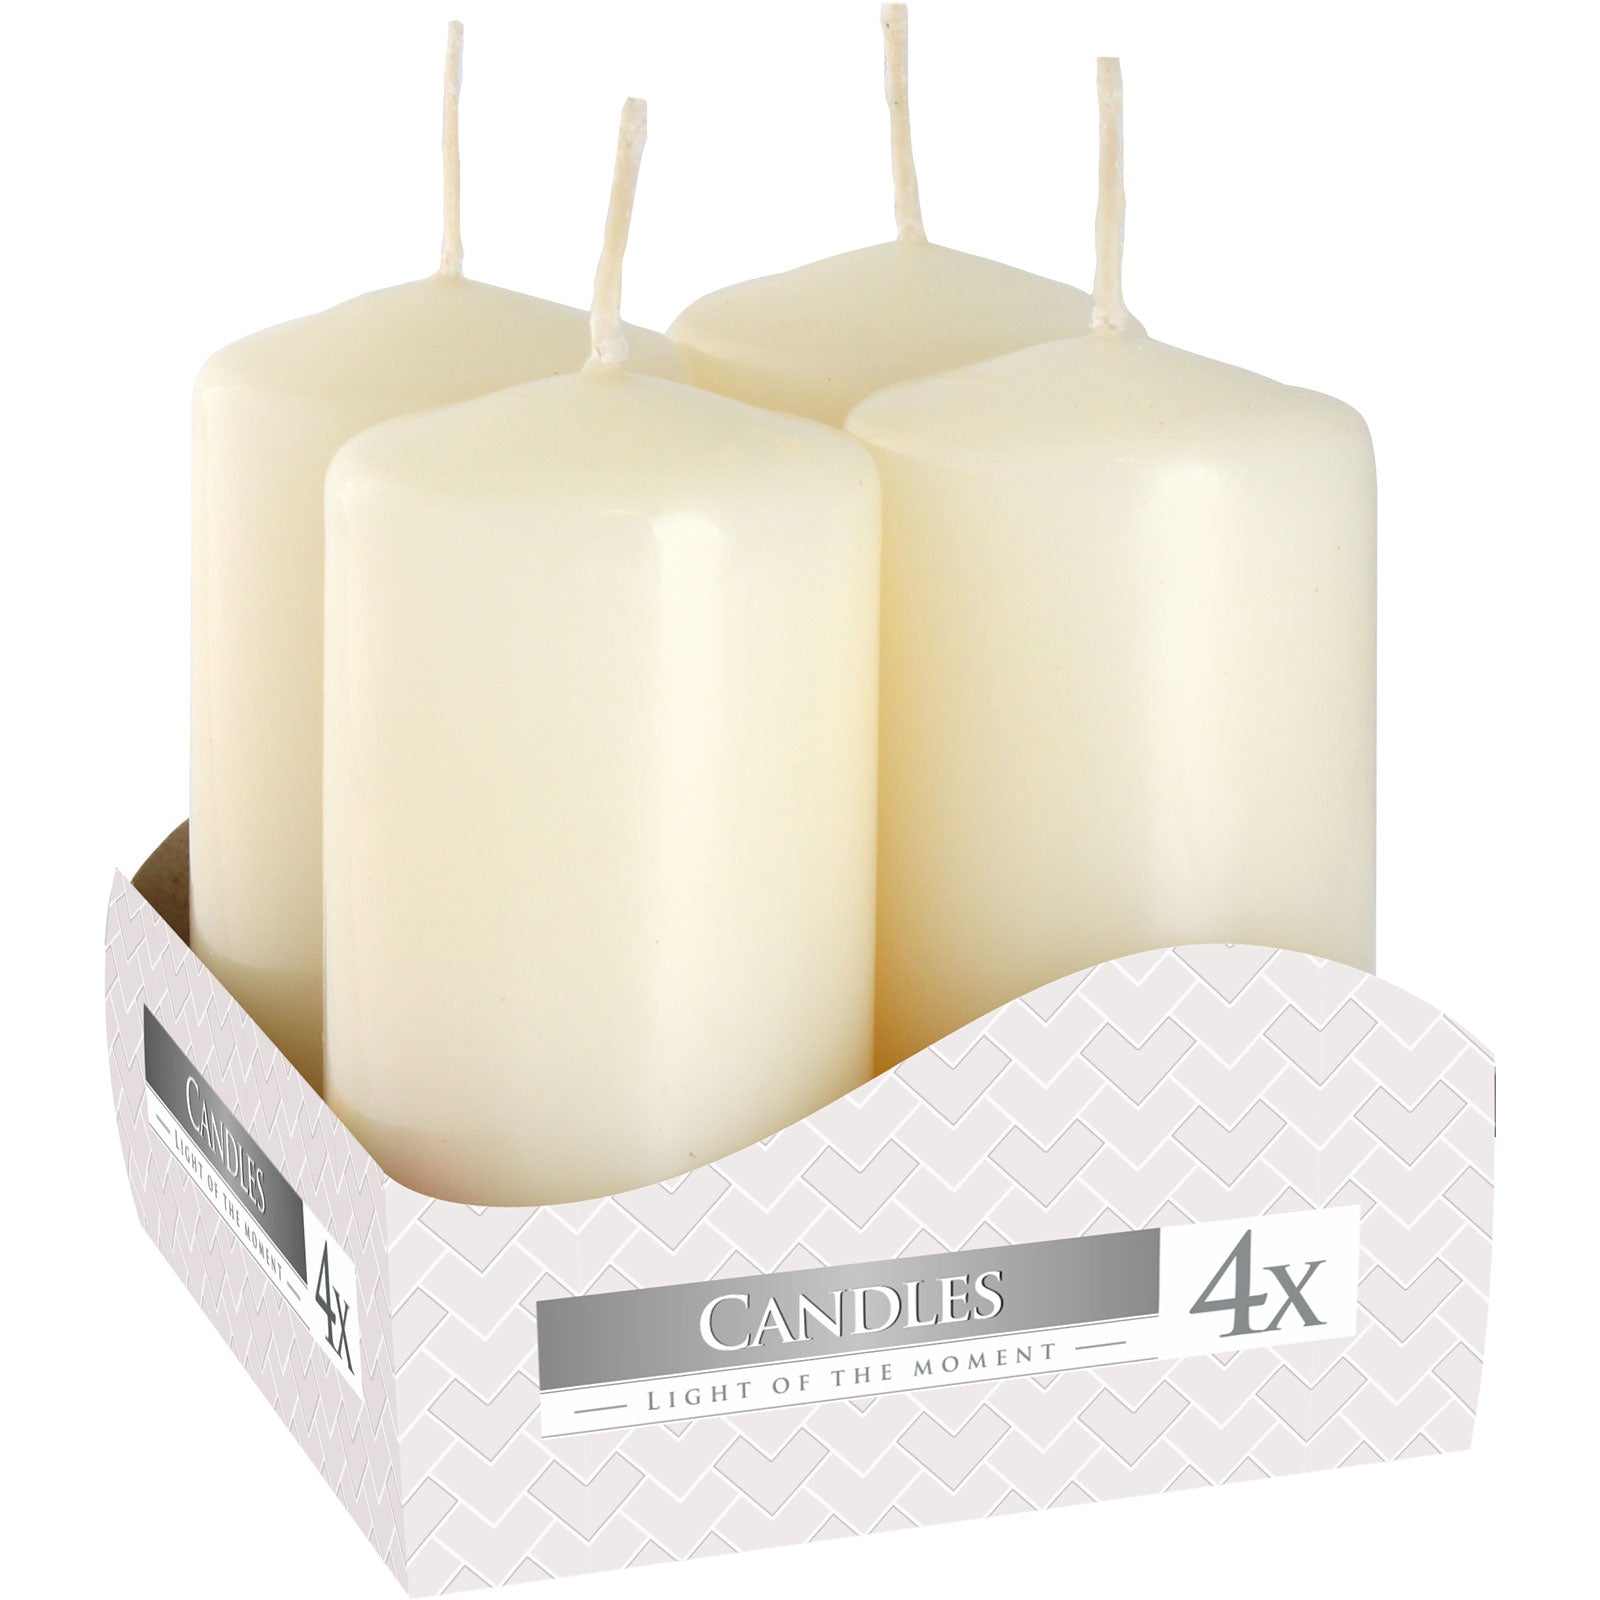 View Set of 4 Pillar Candles 40x80mm Ivory information